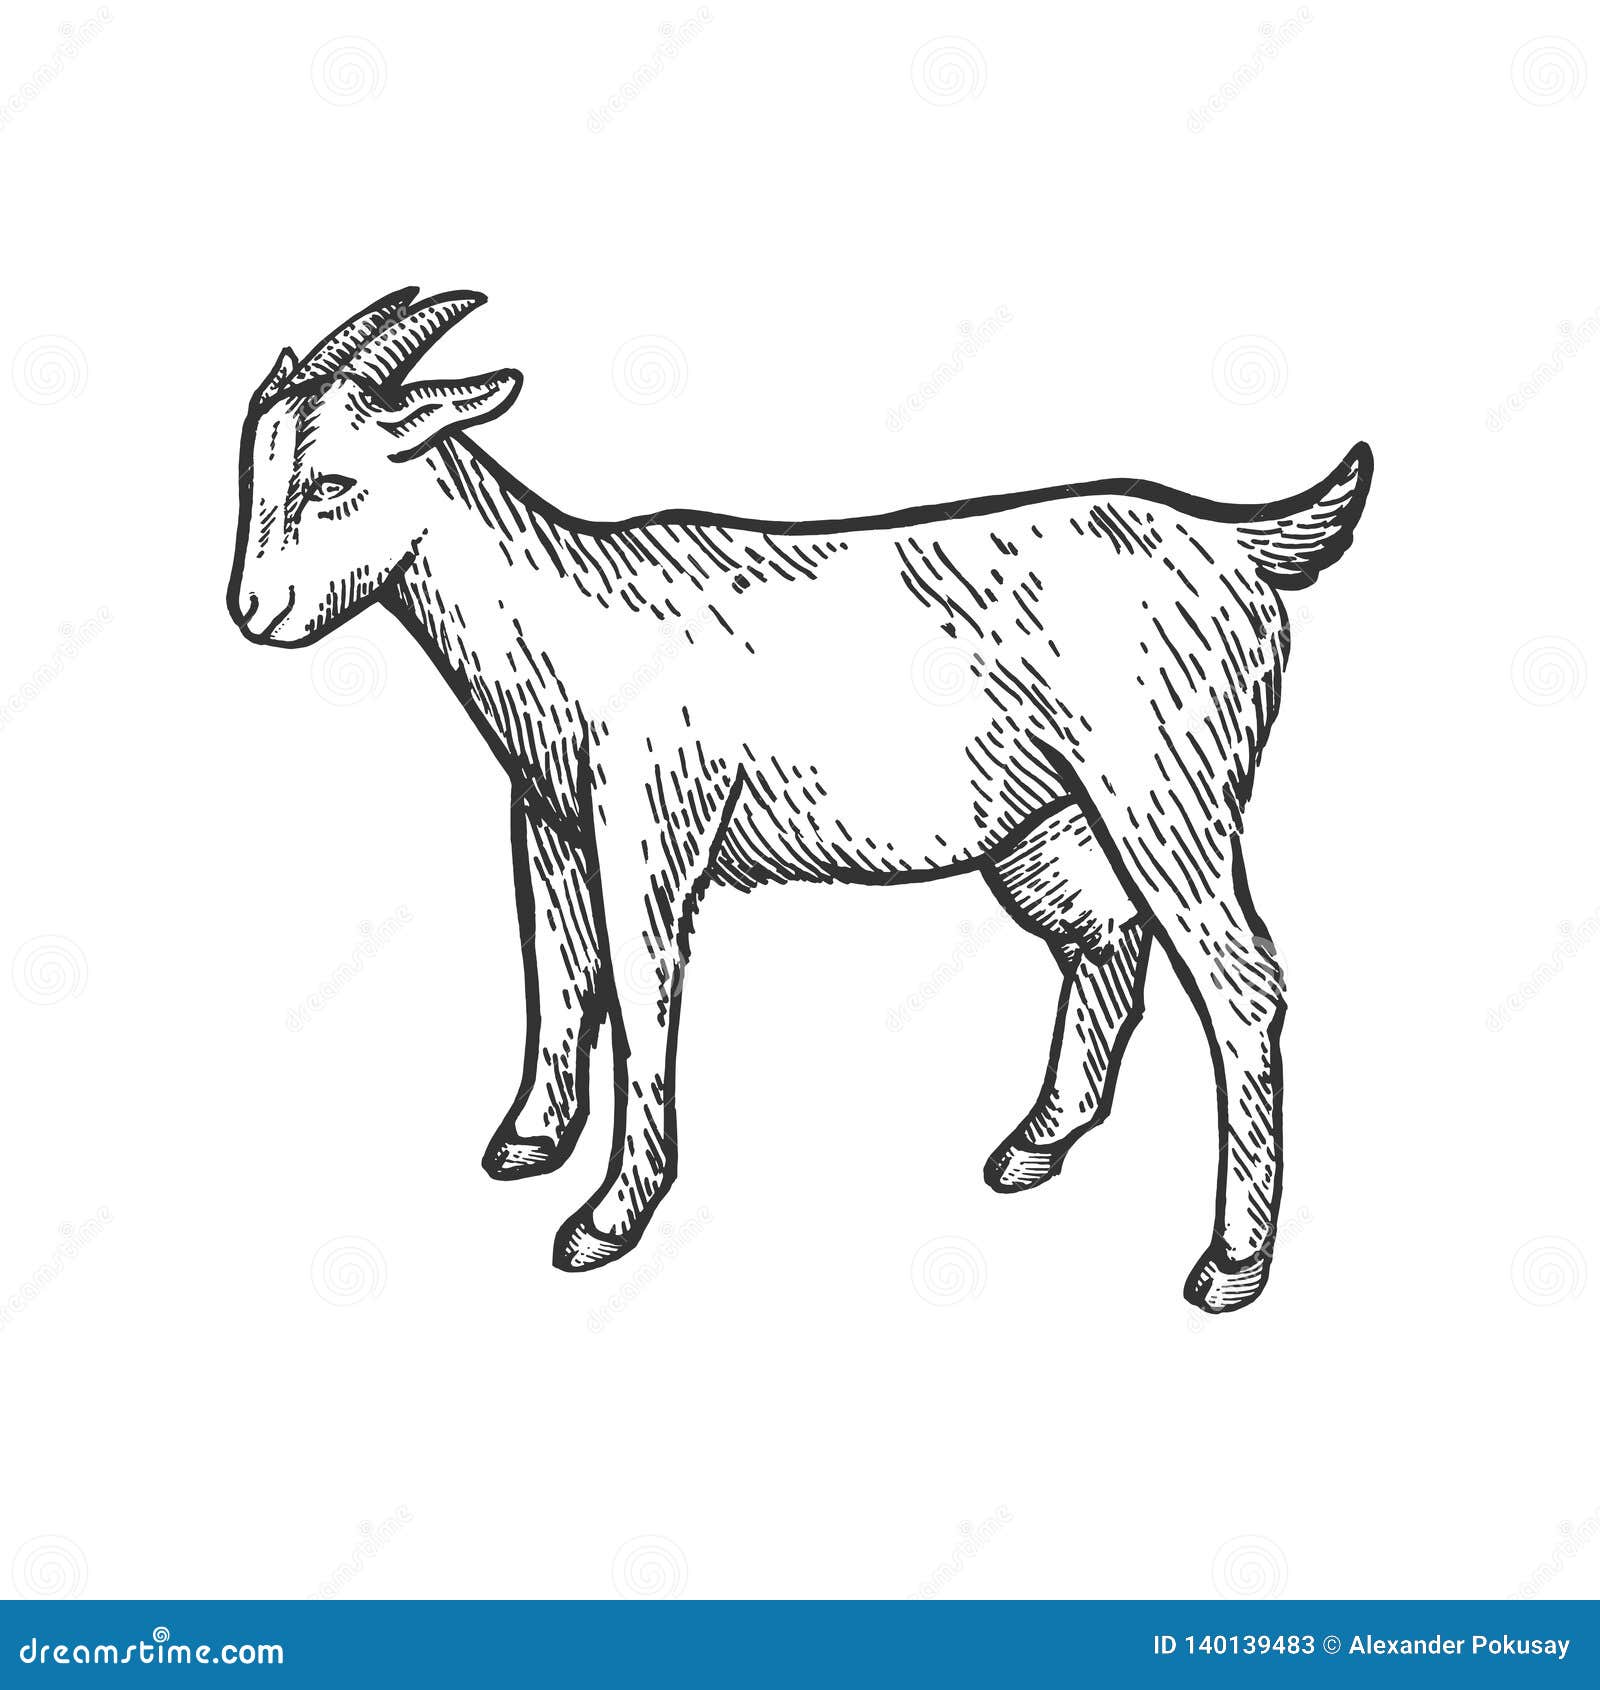 How to Draw a Goat for Beginners